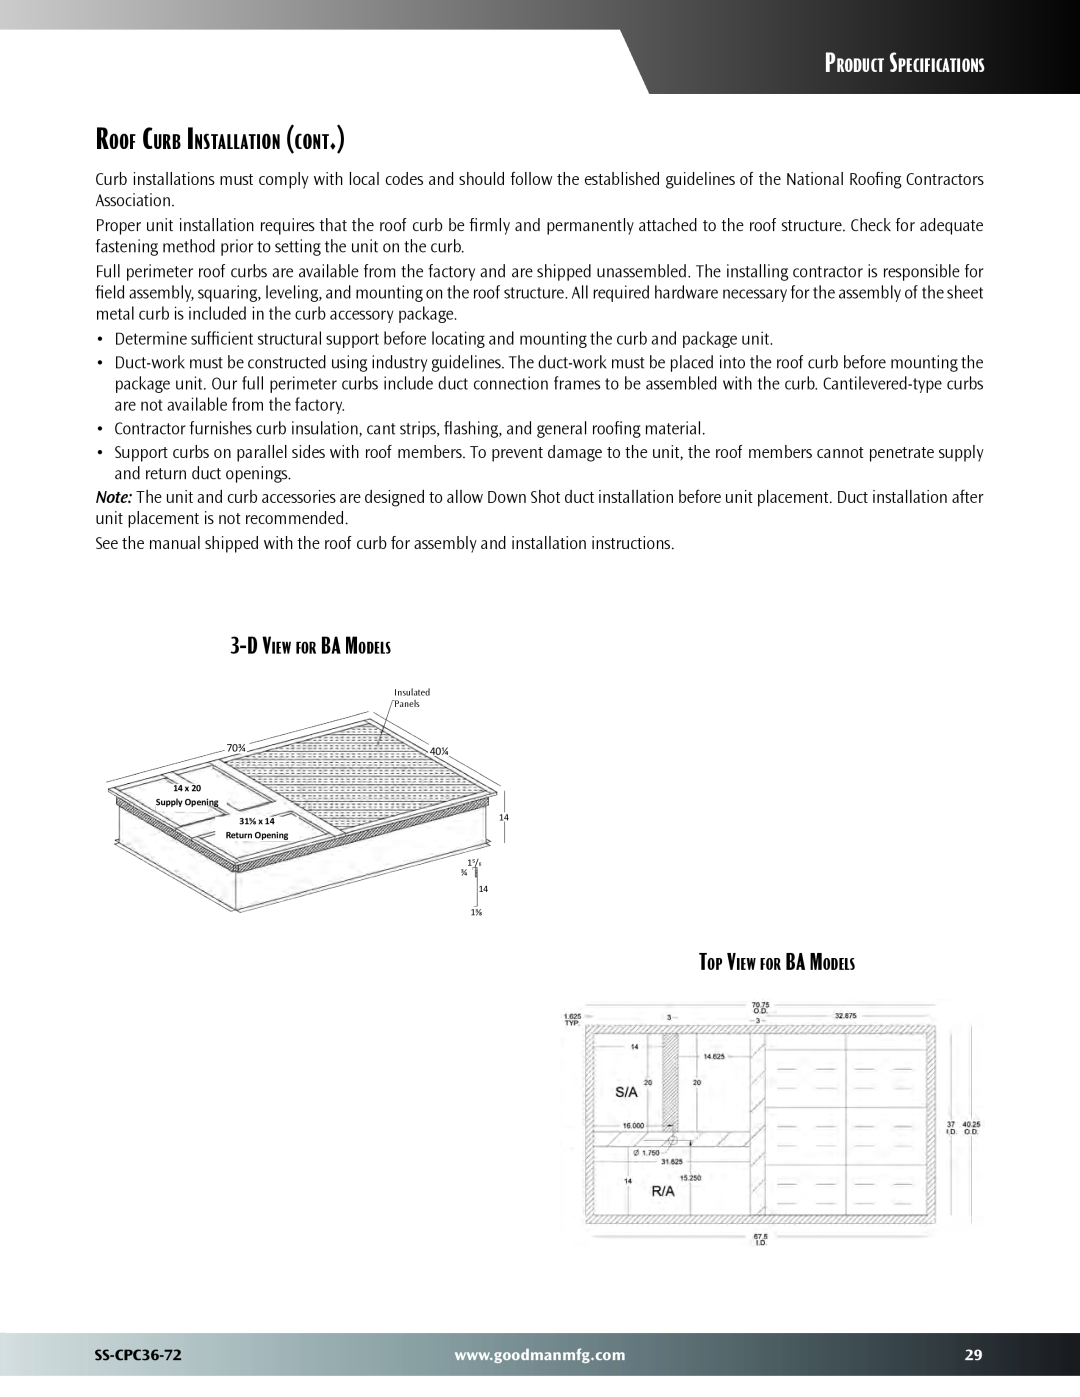 Goodman Mfg SS-CPC36-72 Roof Curb Installation cont, Product Specifications, DView for BA Models, Top View for BA Models 